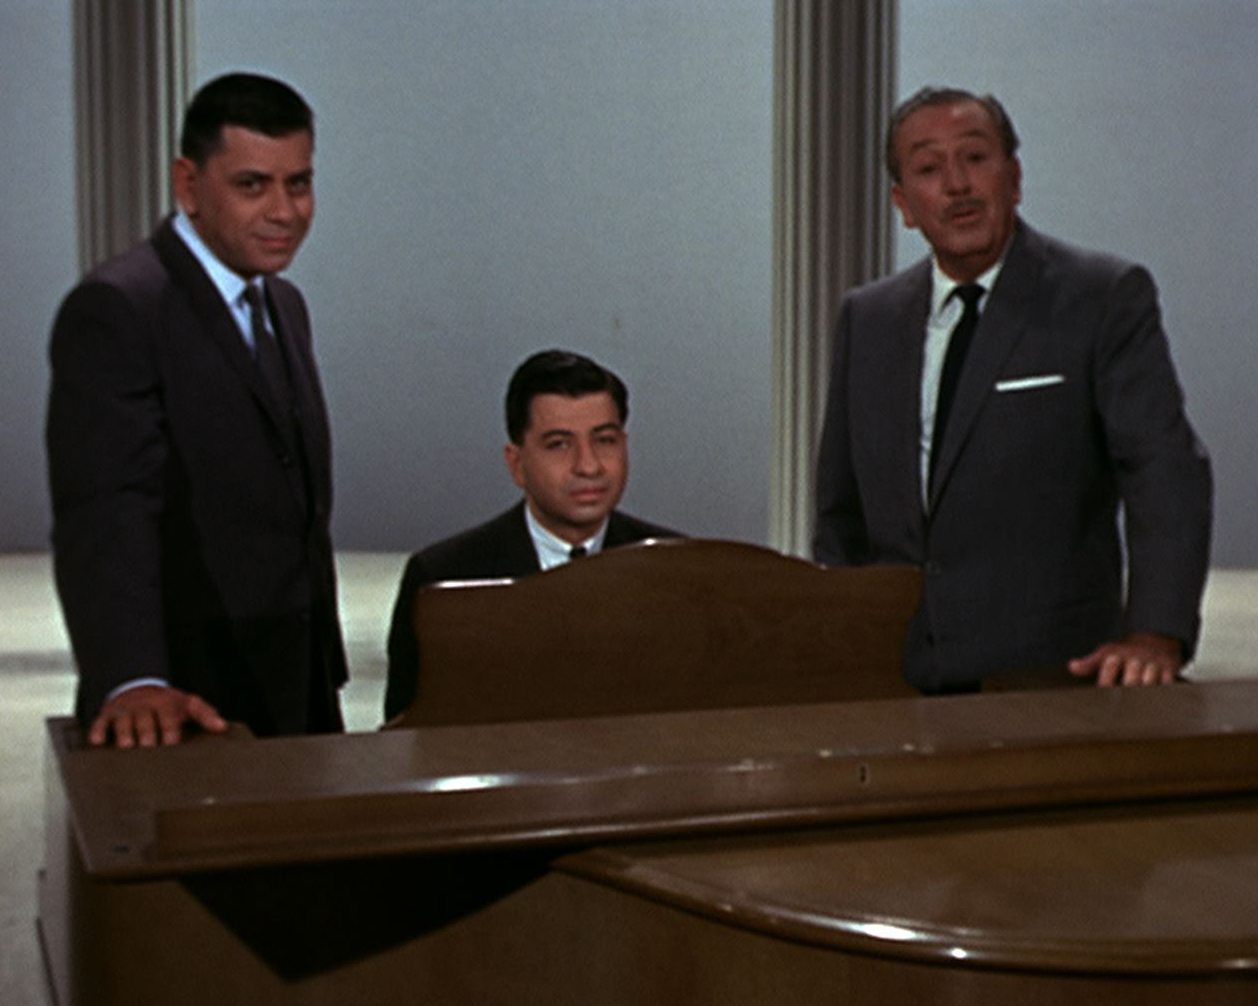 The Boys: The Sherman Brothers’ Story Celebrates A Legacy